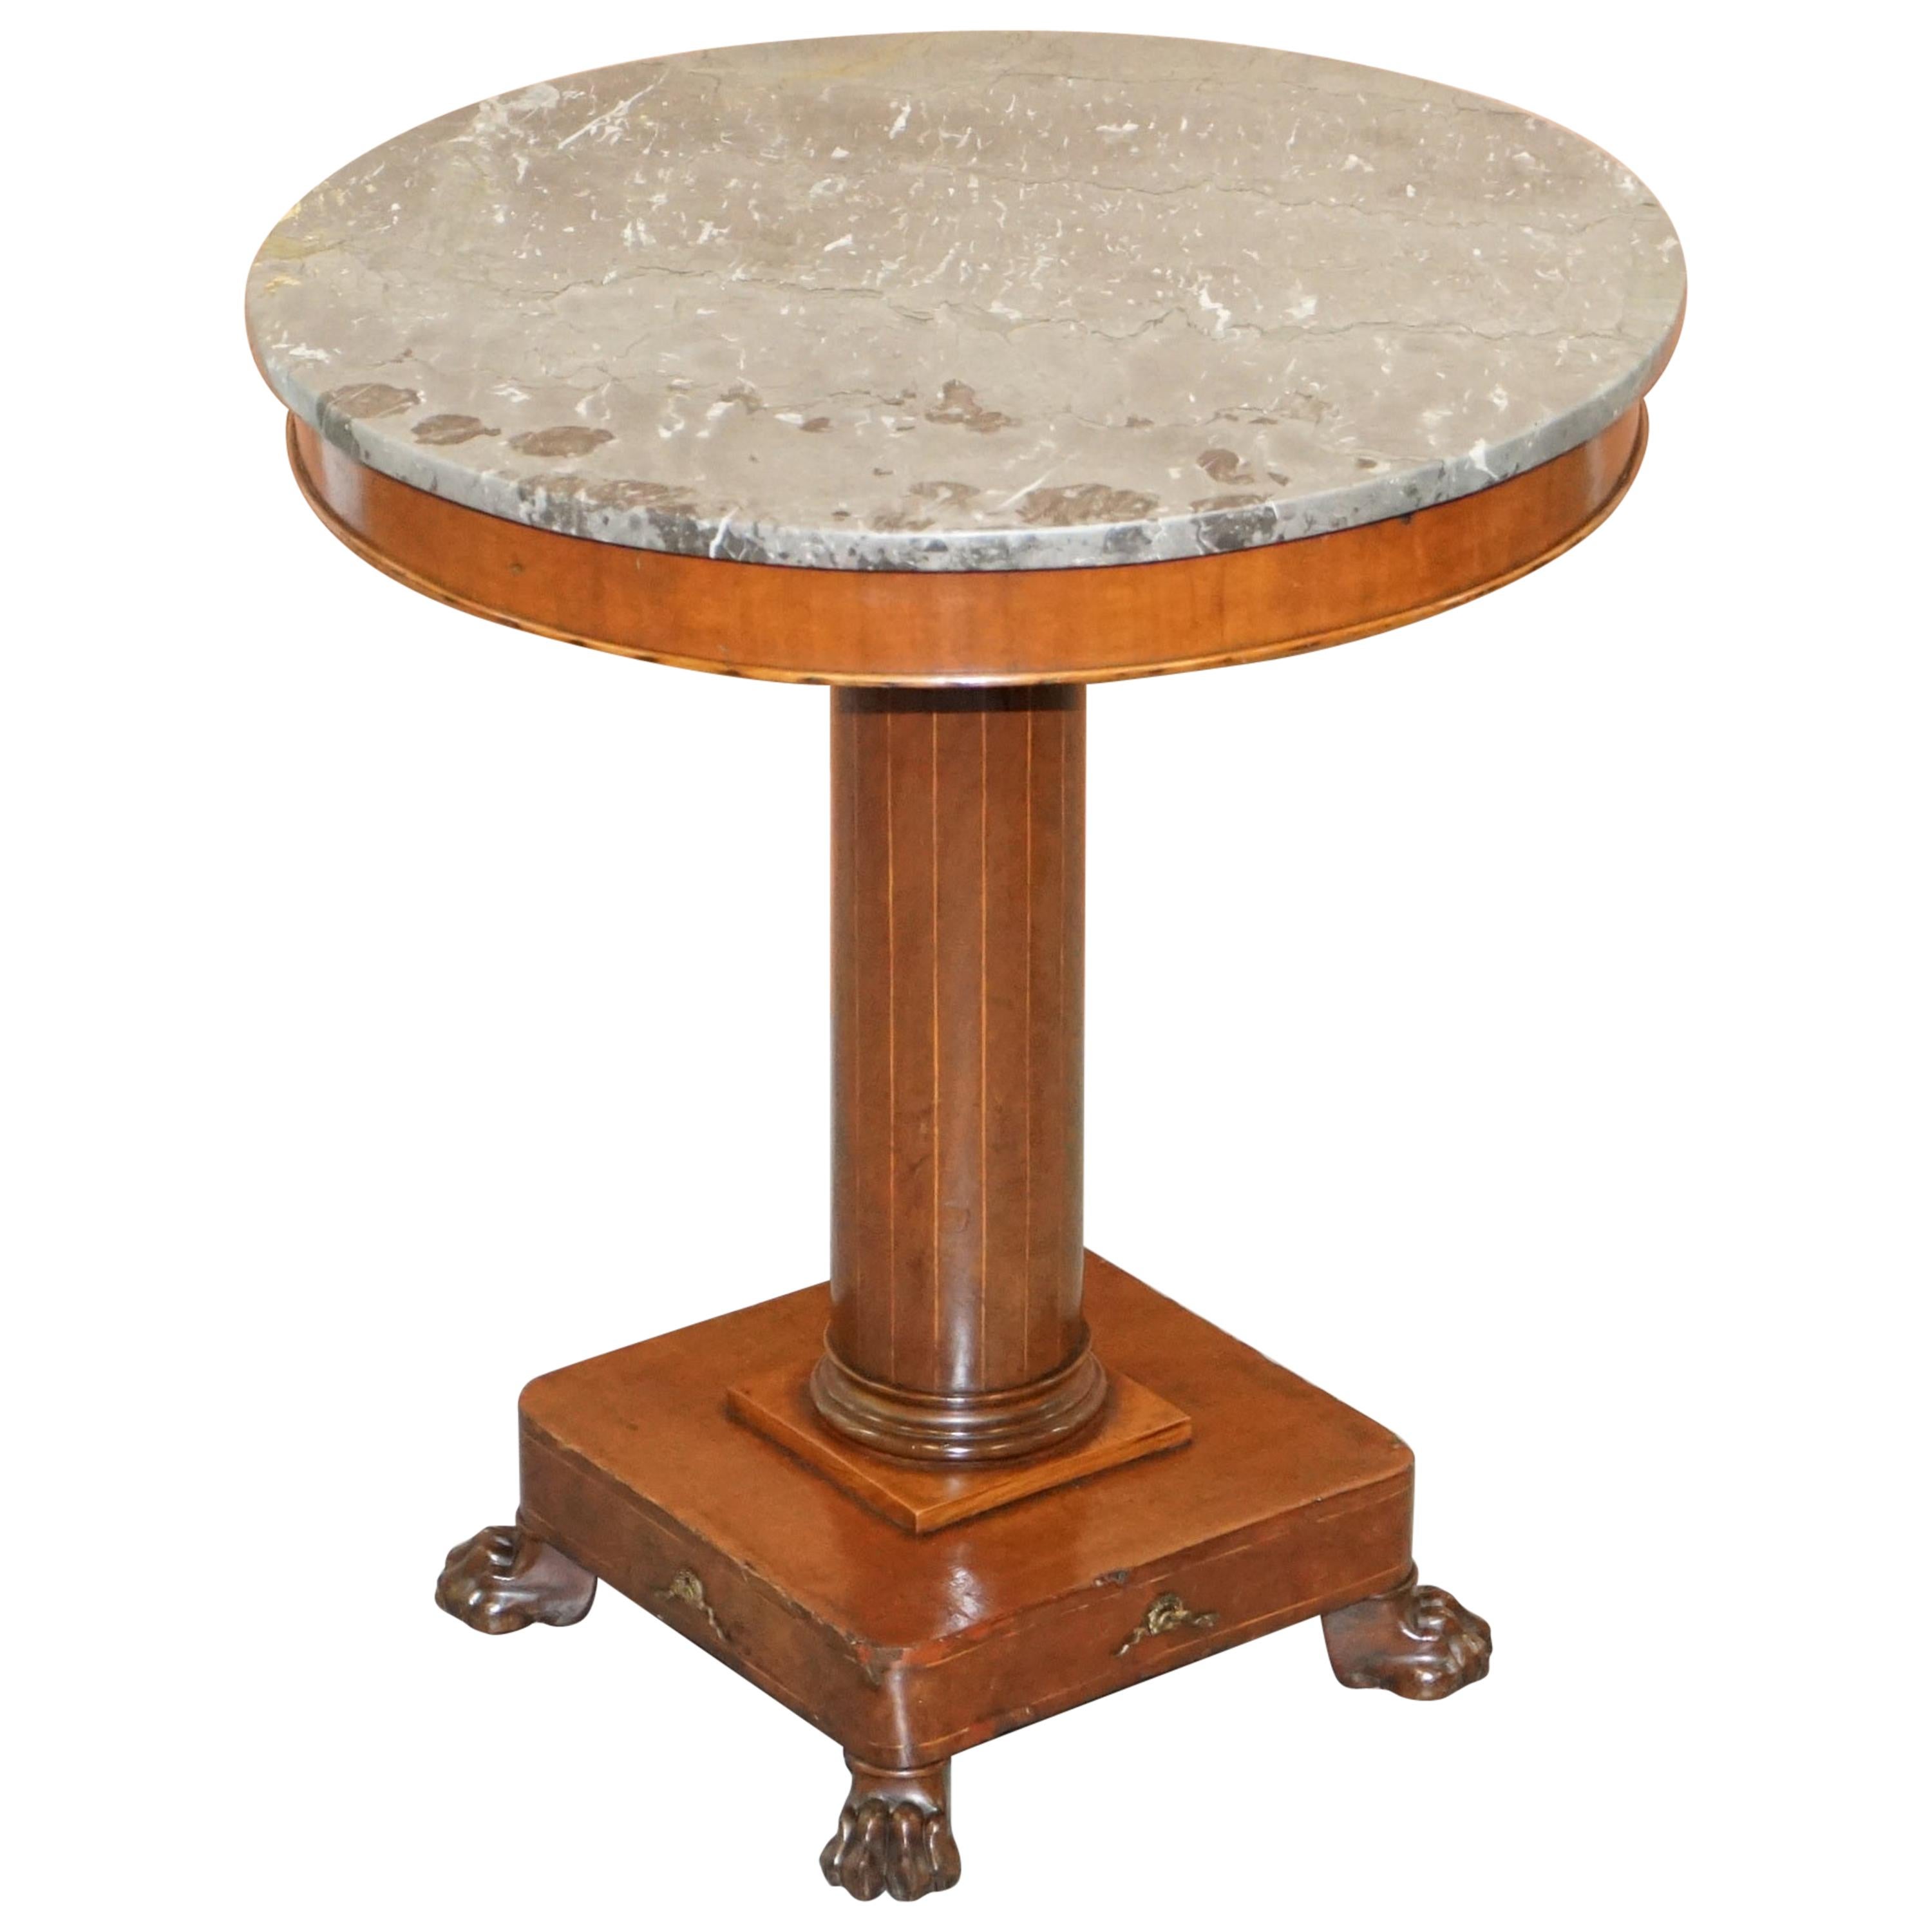 Stunning Napoleon III French Empire Revival Occasional Centre Table Marble Top For Sale